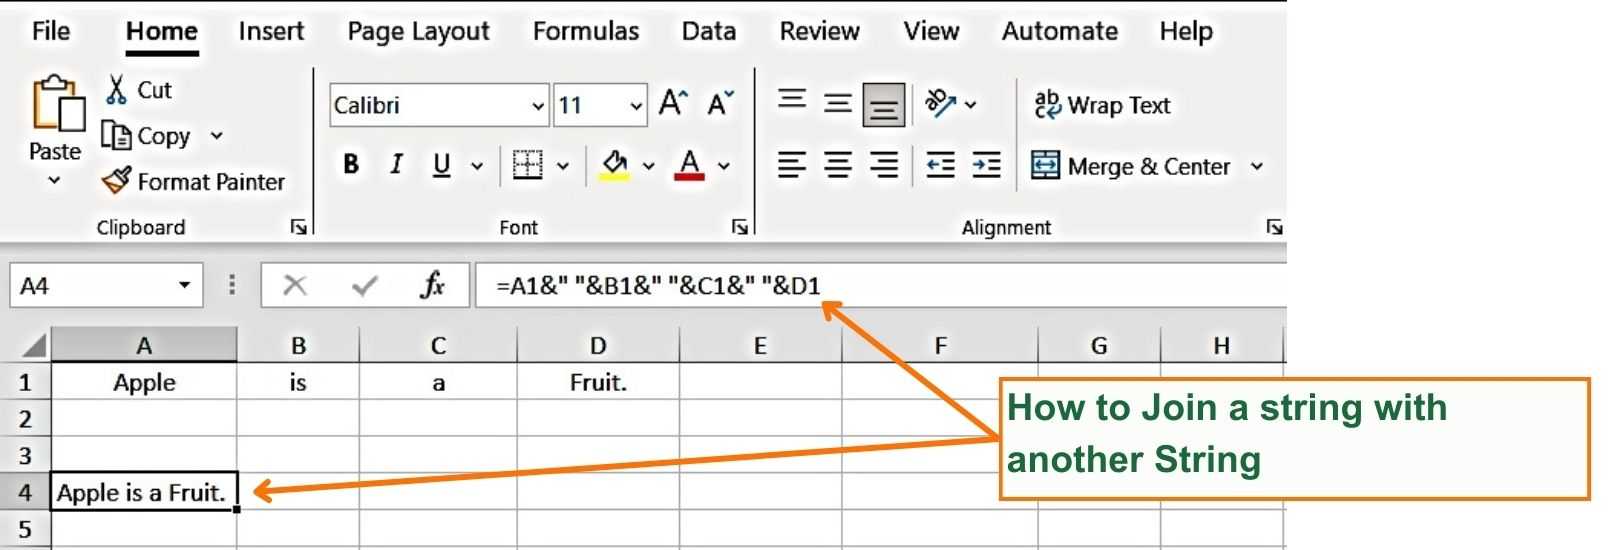 How to Join a string with another String - Excel Hippo